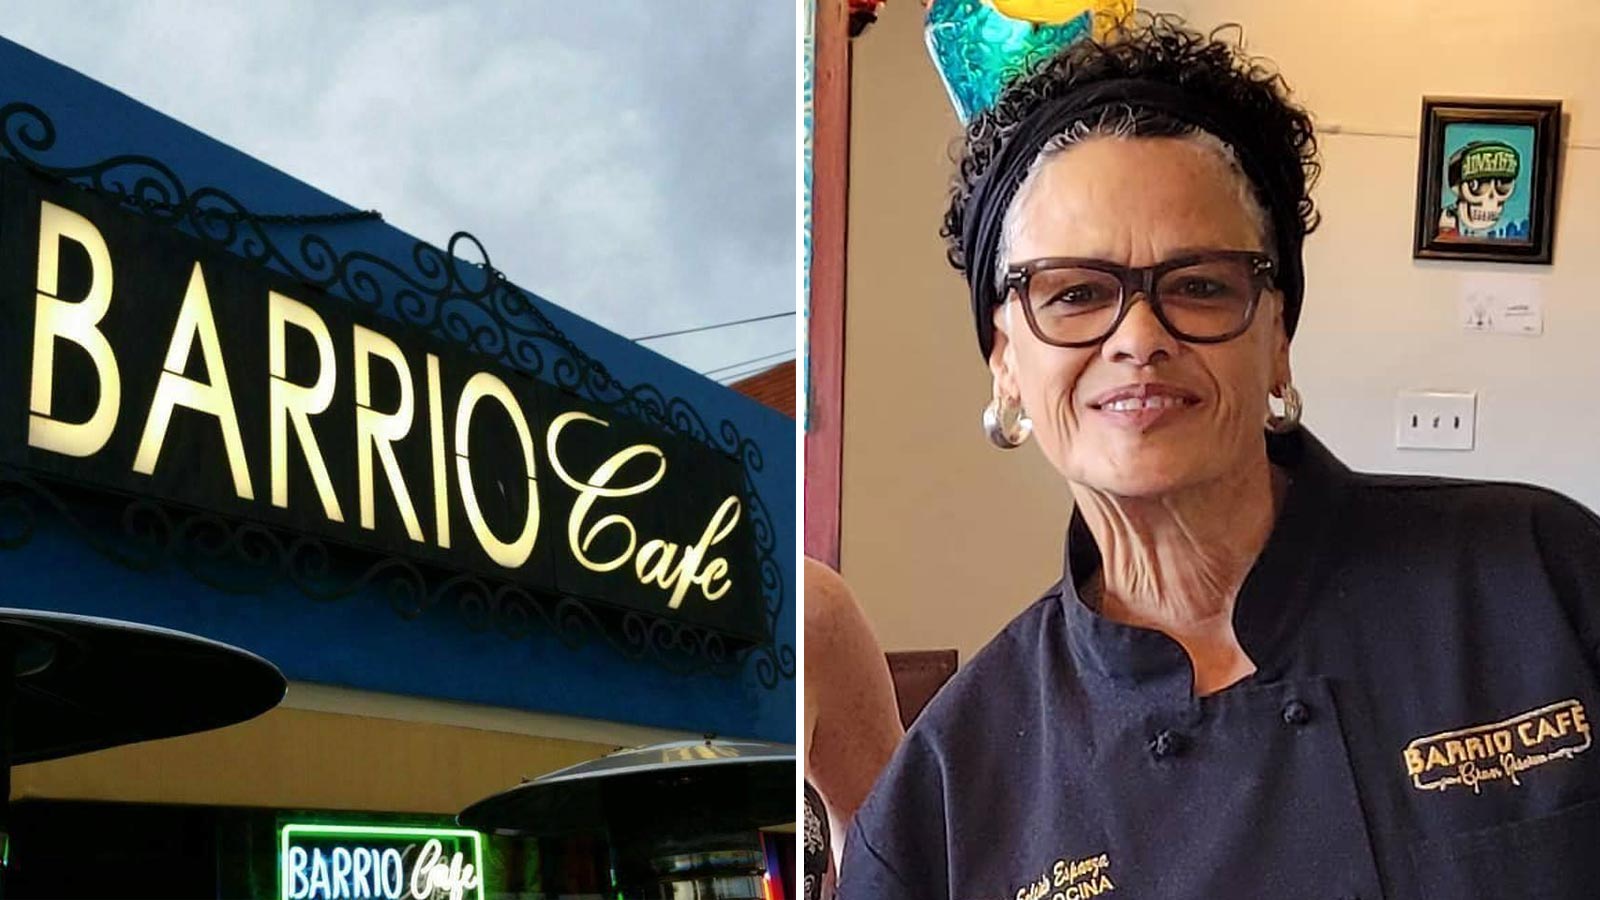 Phoenix's iconic Barrio Café restaurant closing after 22 years, as legendary chef turns page